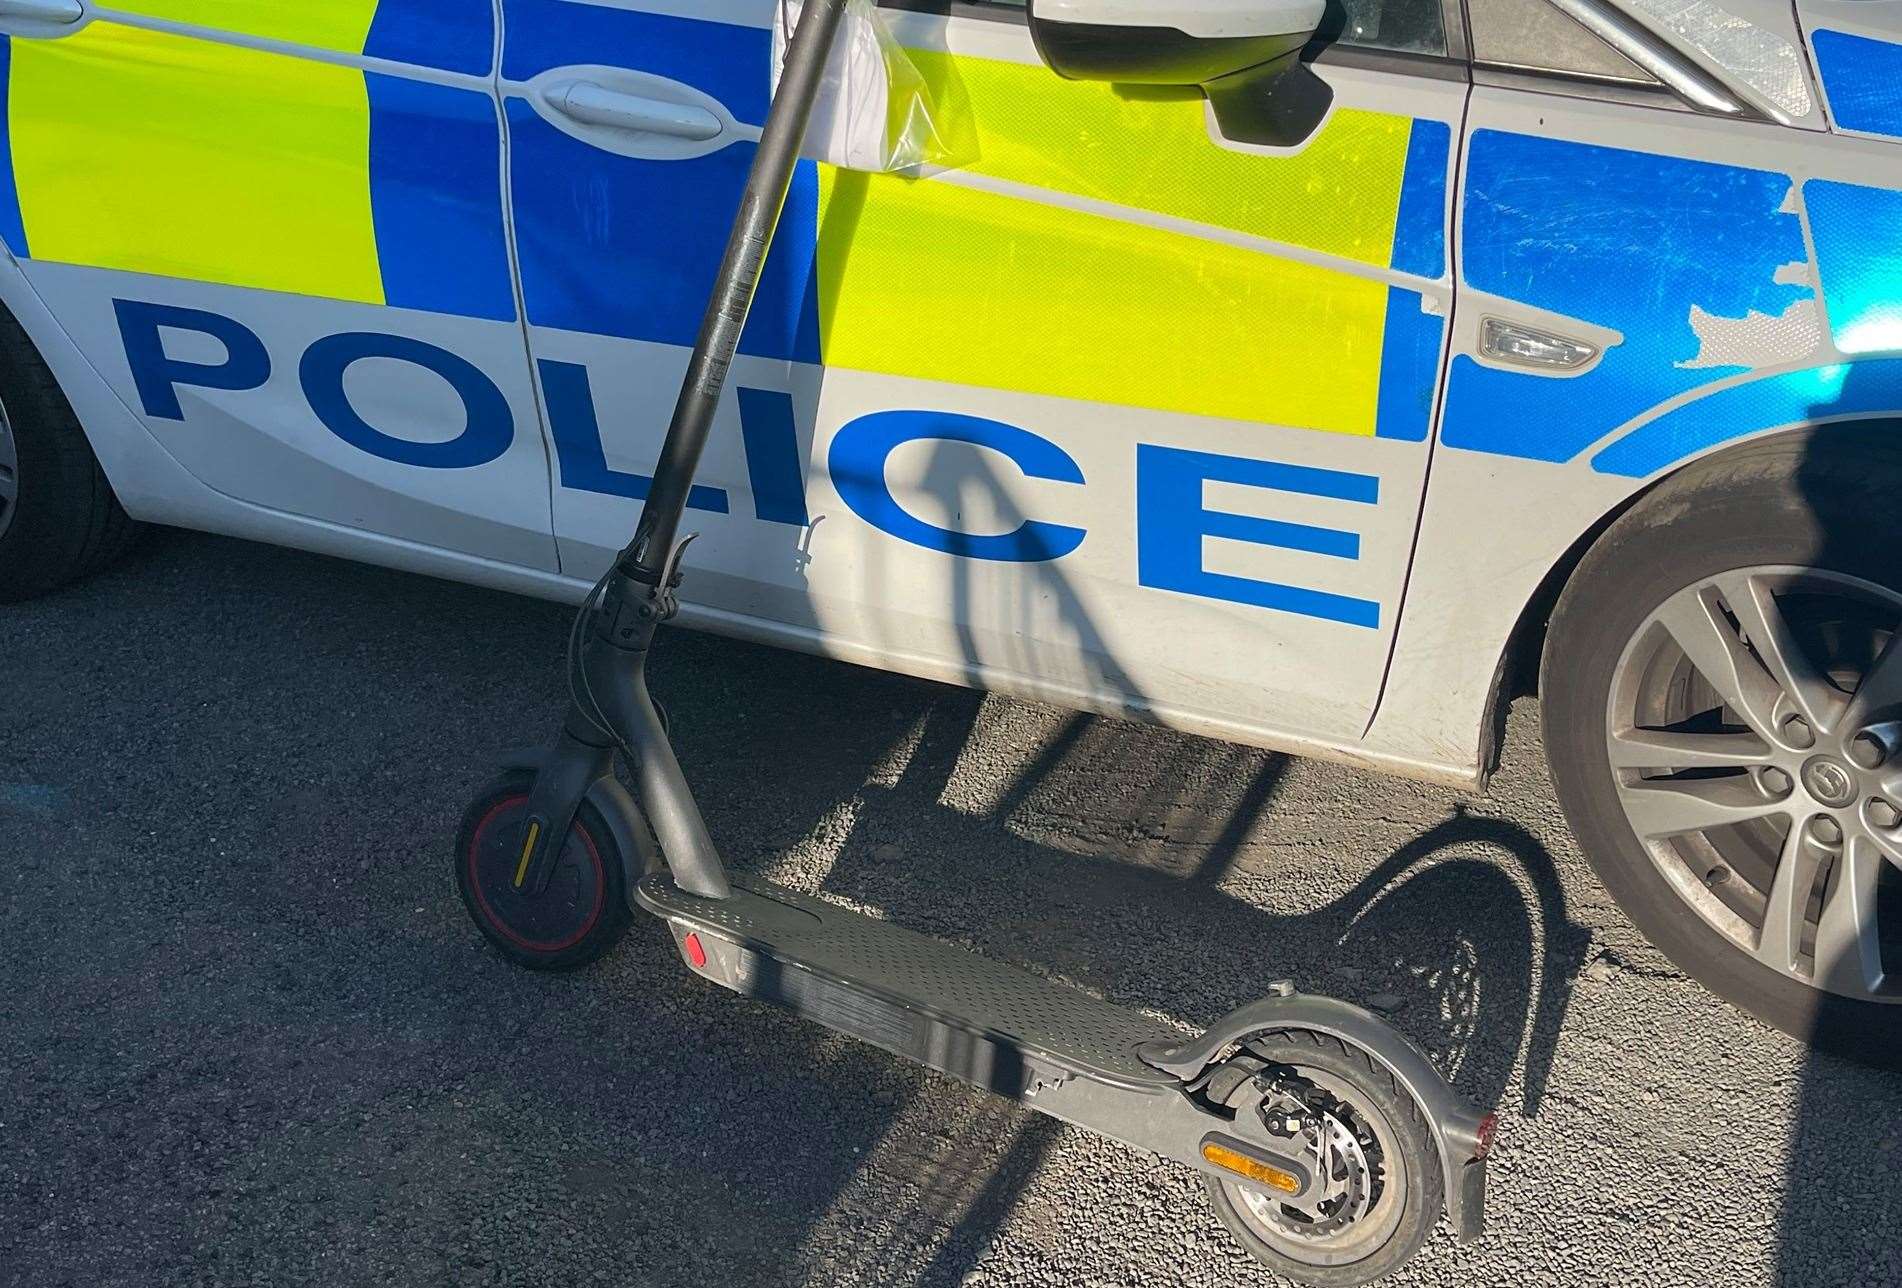 Kent Police are launching a crackdown on illegal e-scooters in Tonbridge